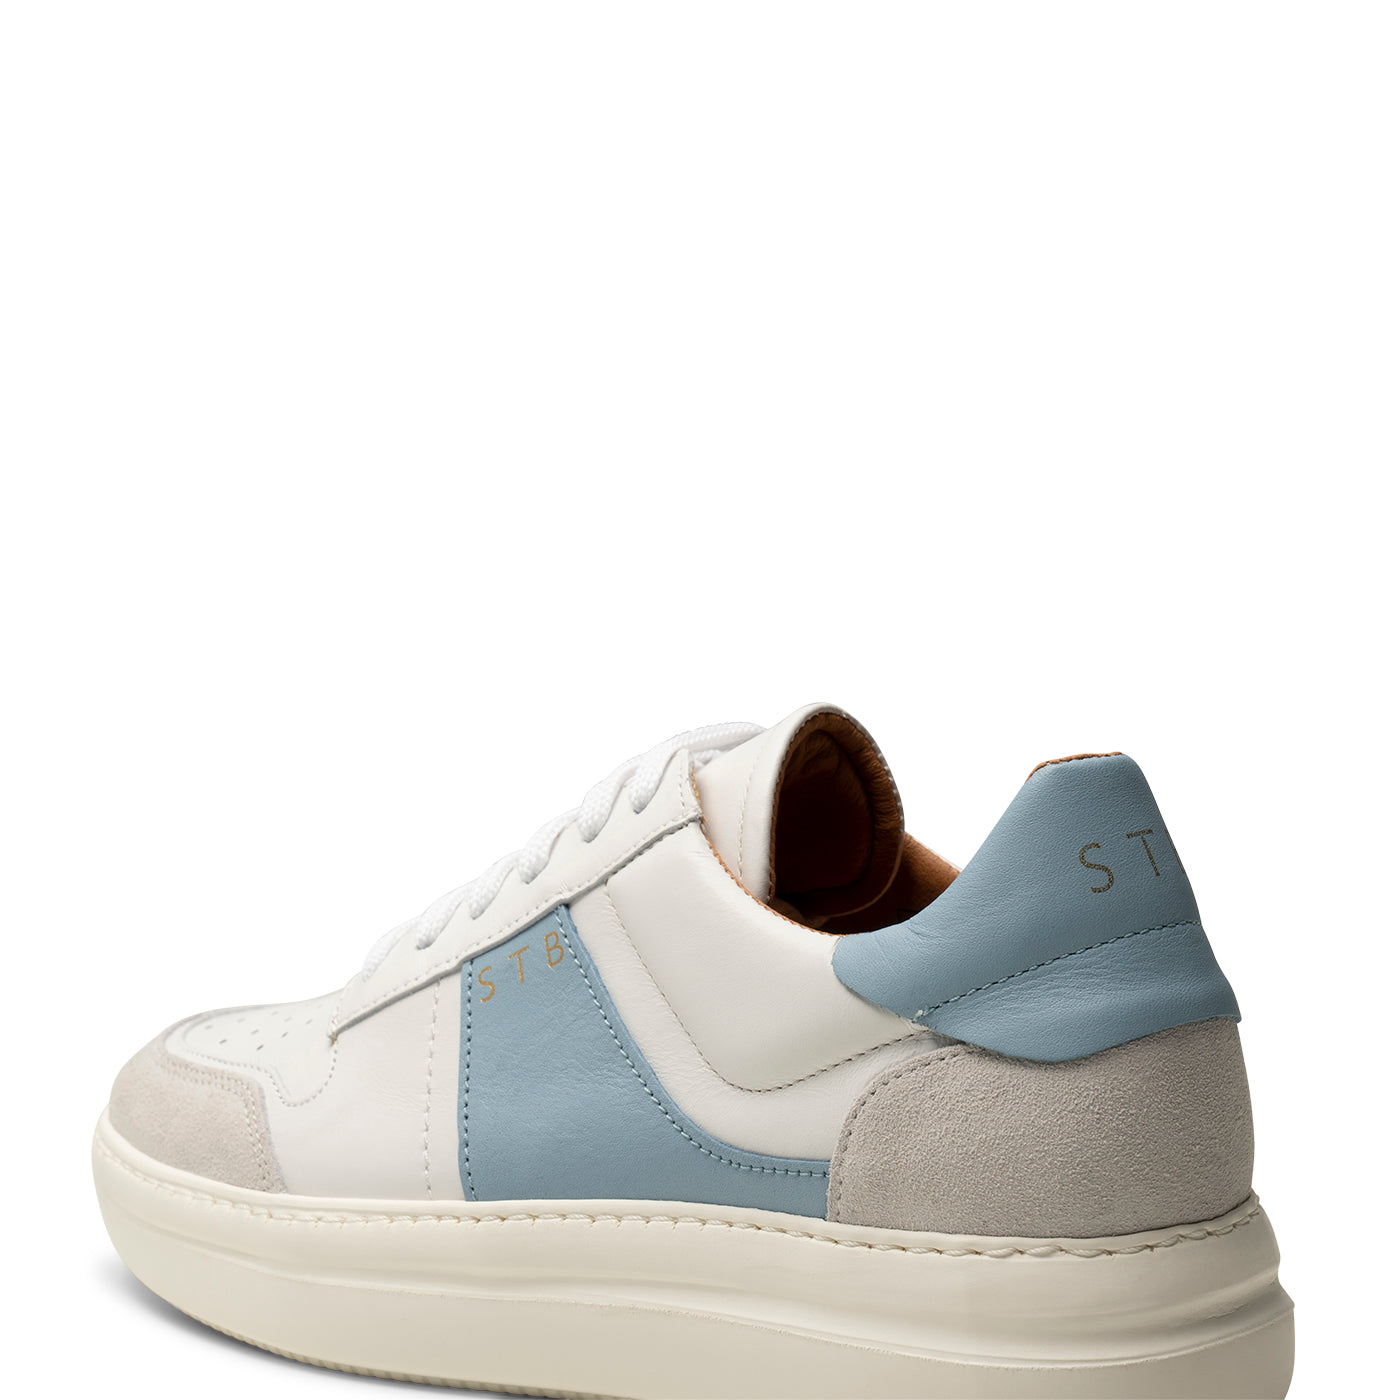 SHOE THE BEAR WOMENS Valda sneaker suede leather Sneakers 836 WHITE/BLUE